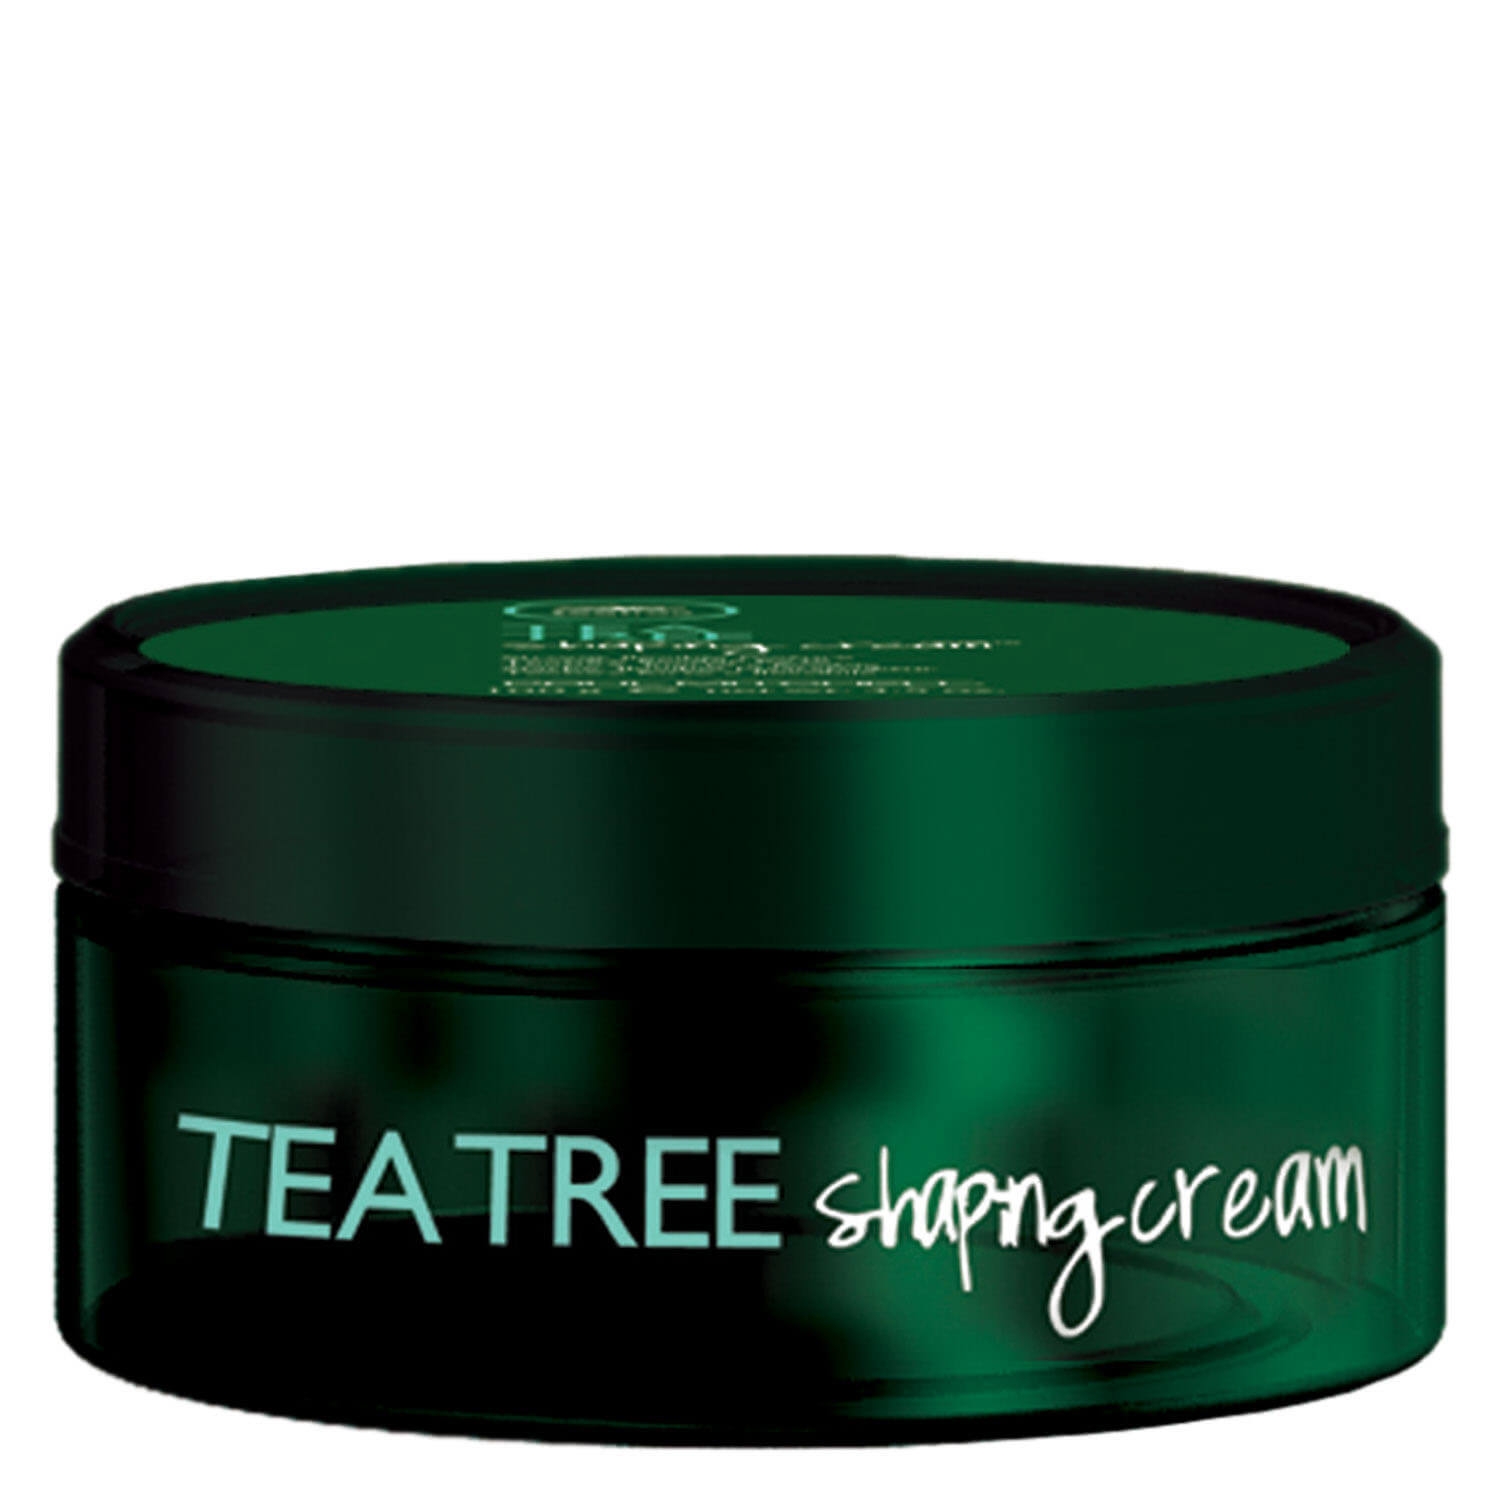 Product image from Tea Tree Special - Shaping Cream